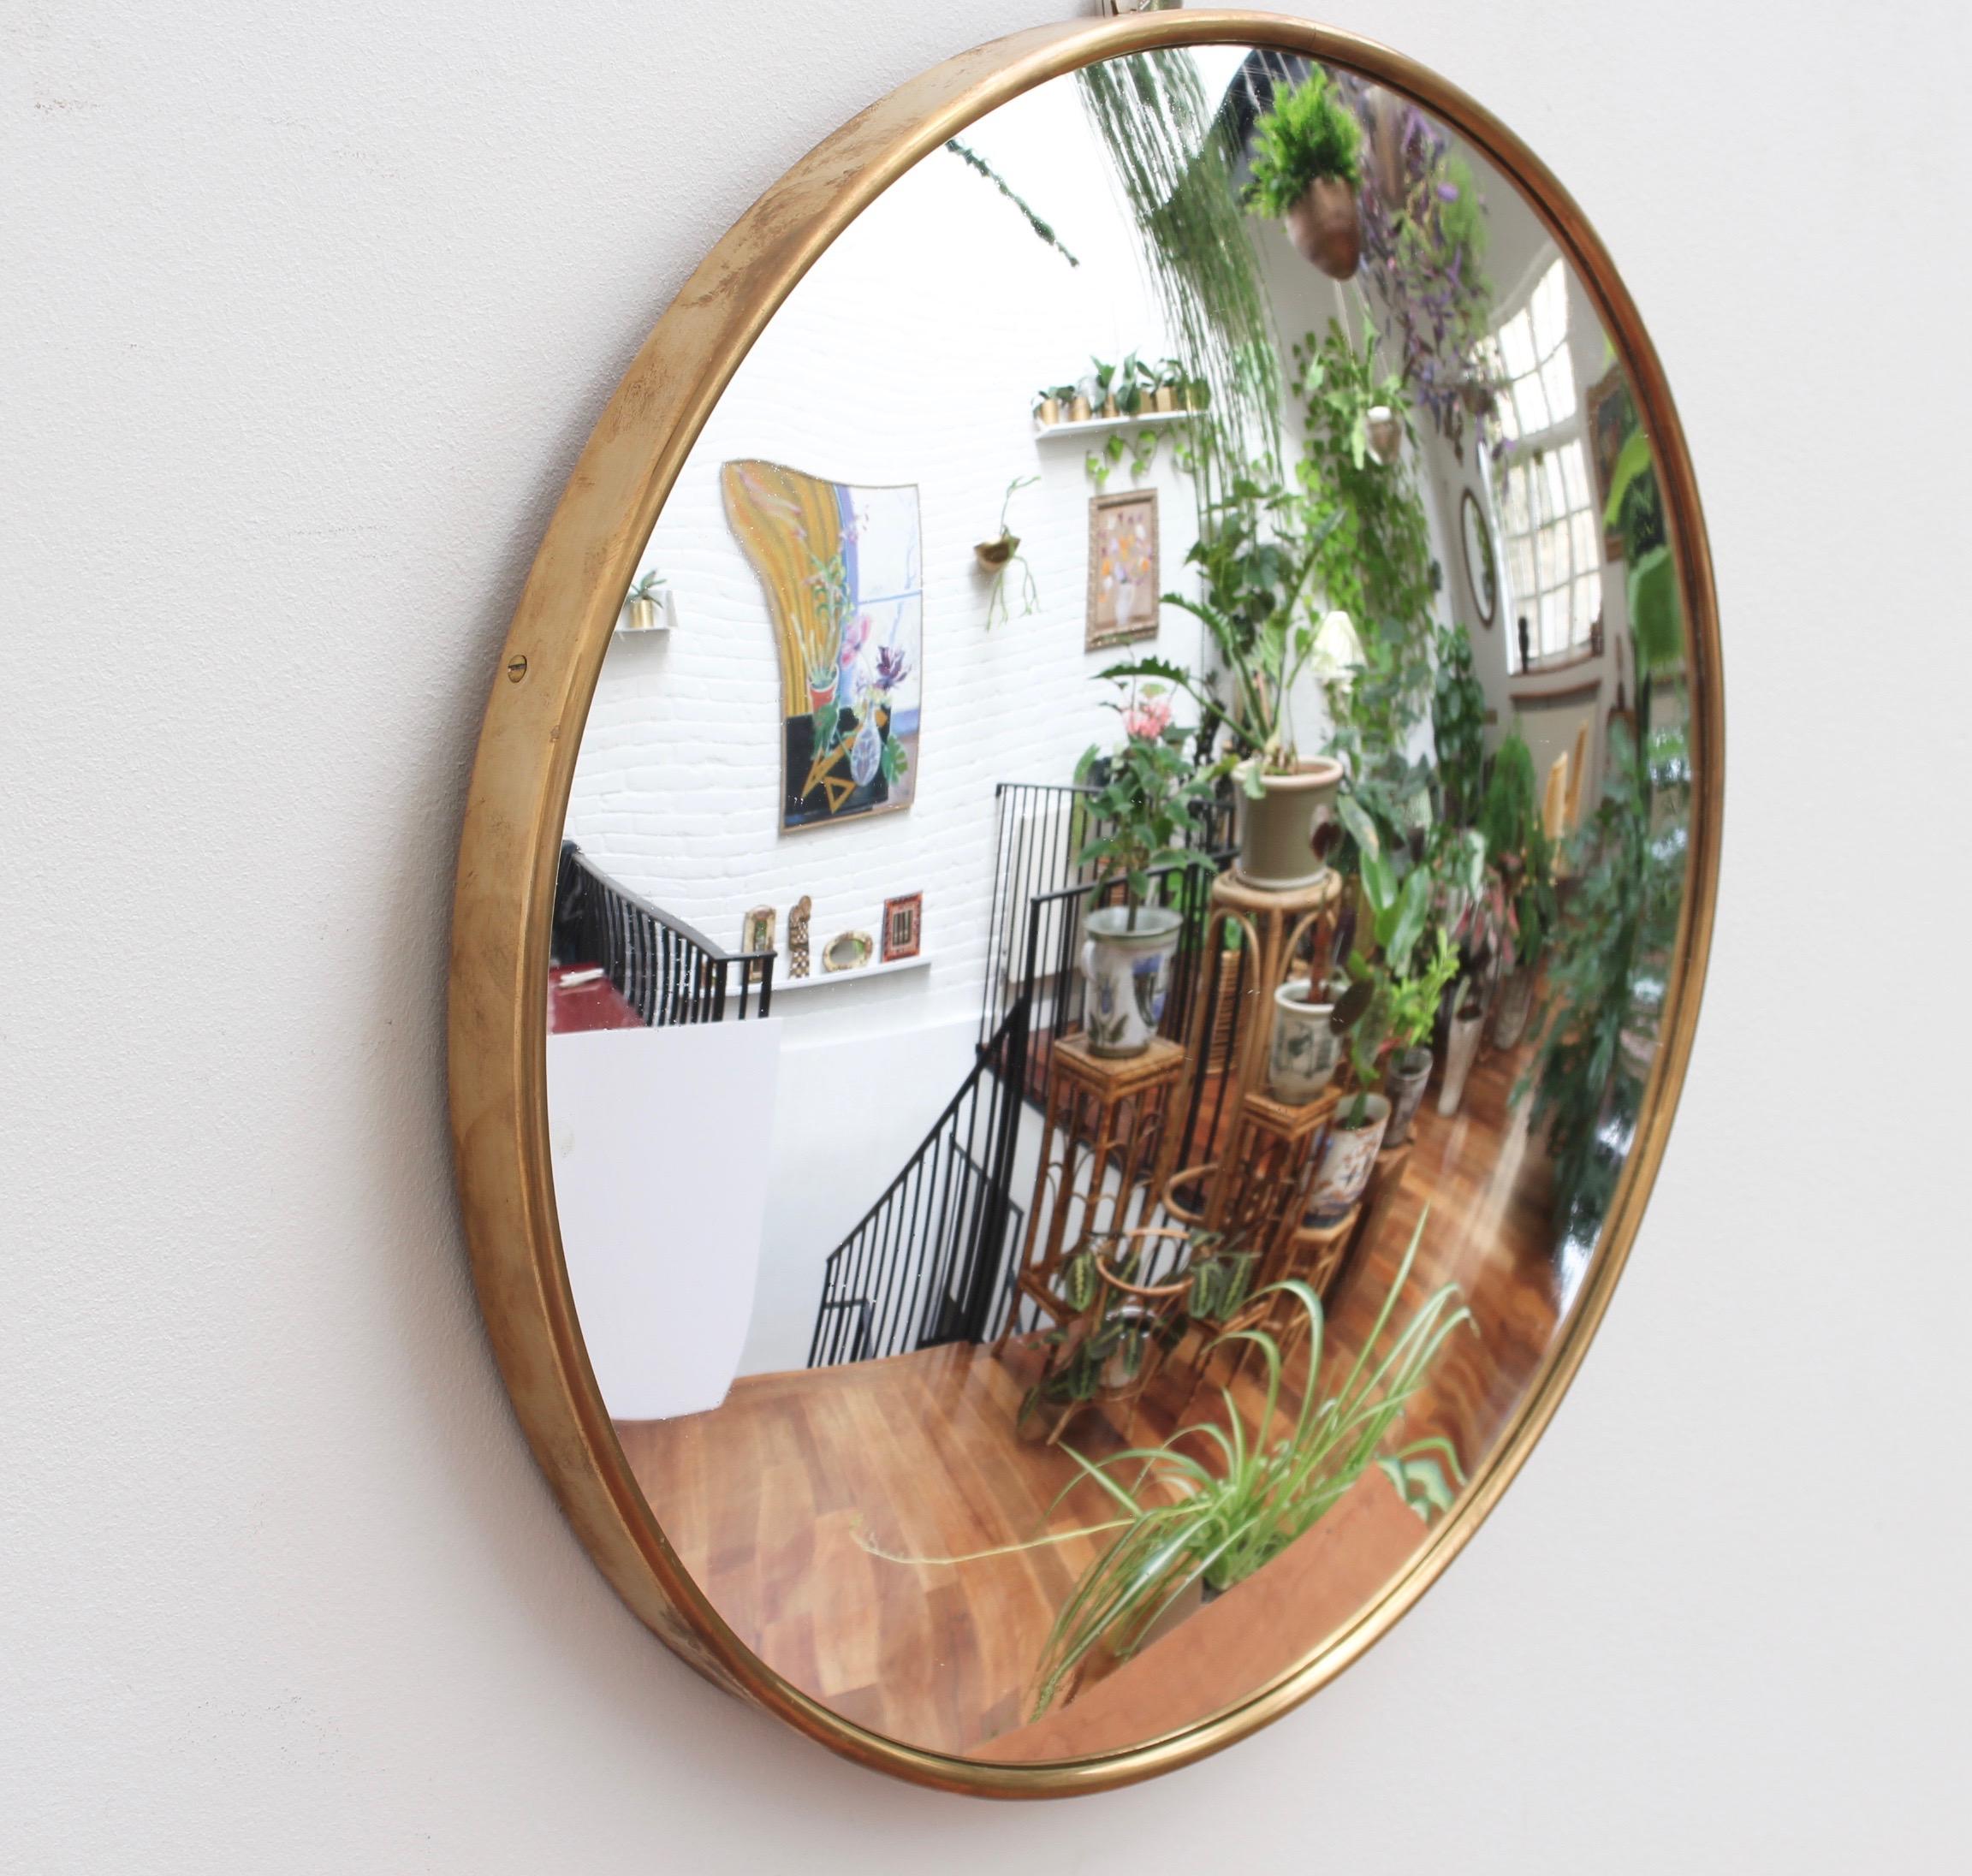 Midcentury Italian convex wall mirror with brass frame (circa 1950s). This relatively small mirror is simply elegant and characterful in a modern, Gio Ponti style. It is characterized by its circular shape with sensuous curves and convex glass. The